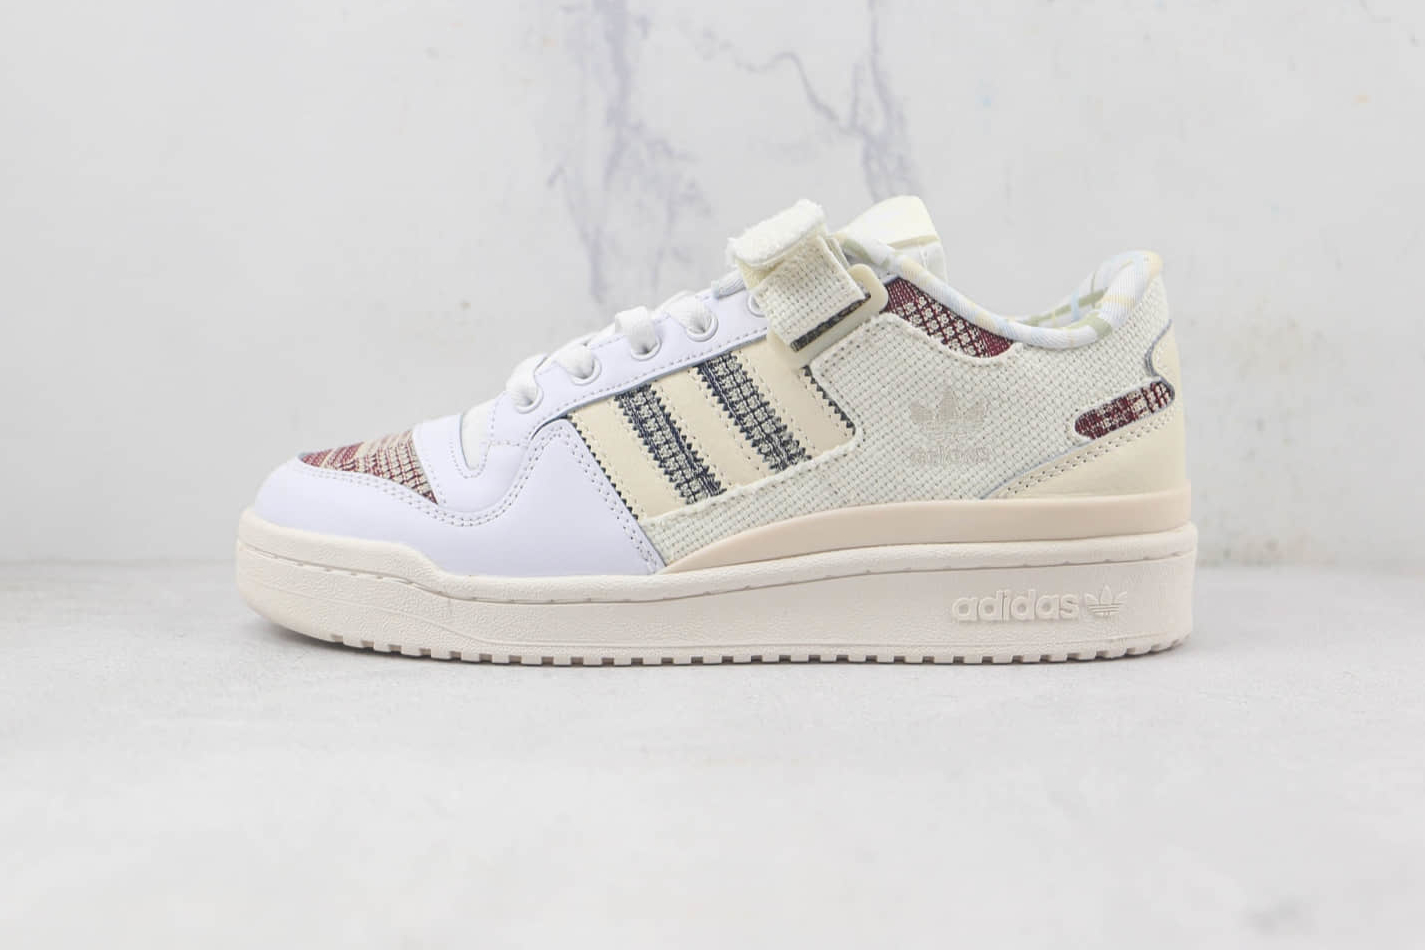 Adidas Originals FORUM Low 'White Beige' GX2174: Classic Style with Modern Touch